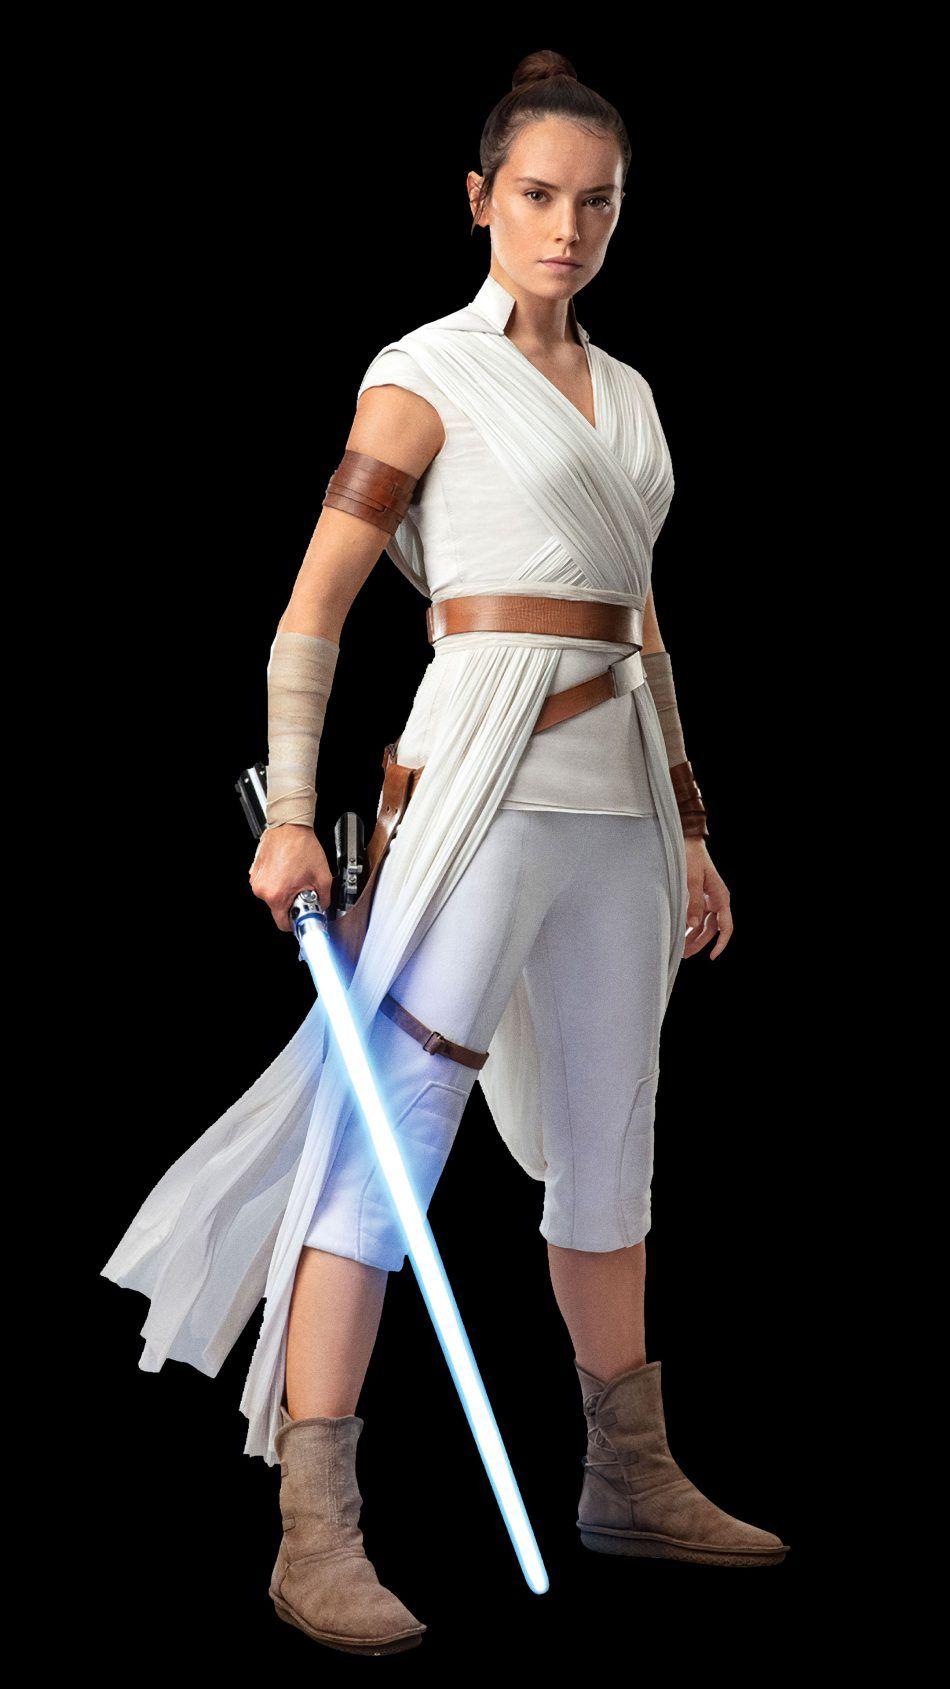 Daisy Ridley As Rey Star Wars The Rise of Skywalker 2019